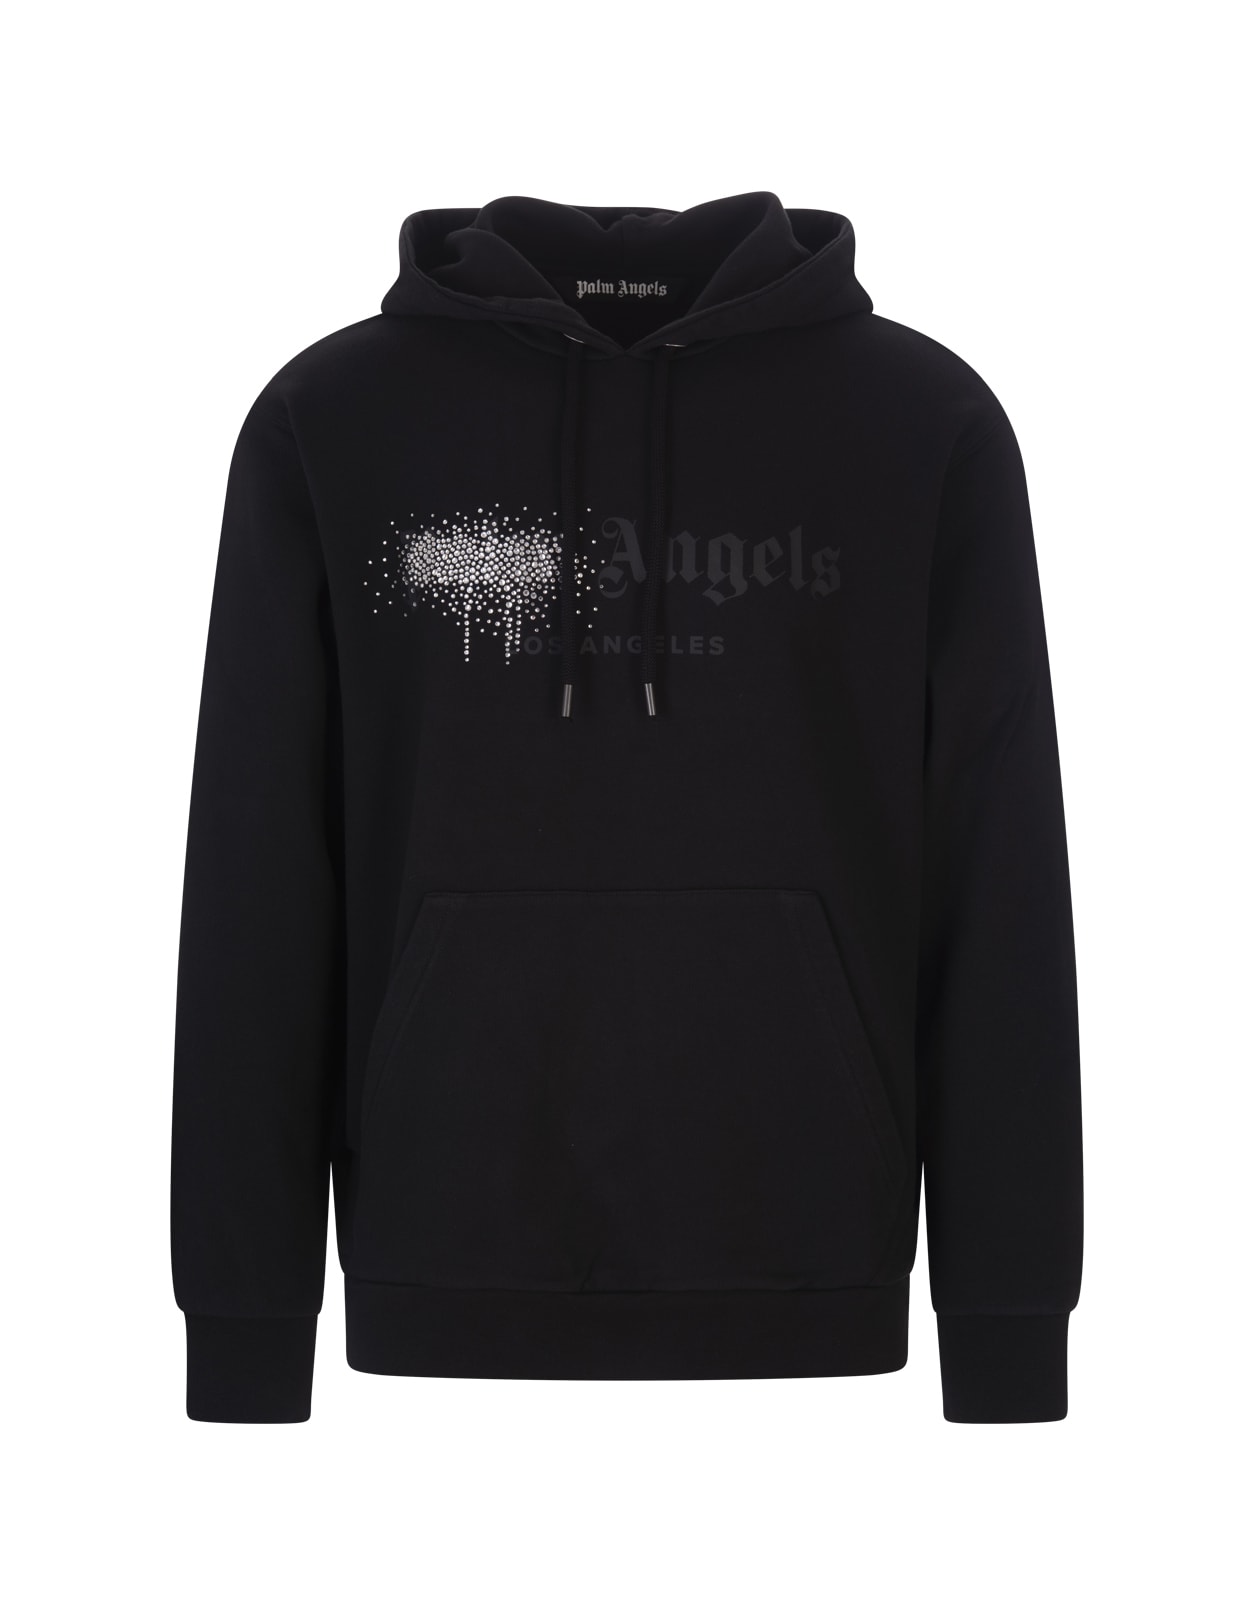 Palm Angels Man Black Hoodie With Patent Effect And Rhinestones On The Front